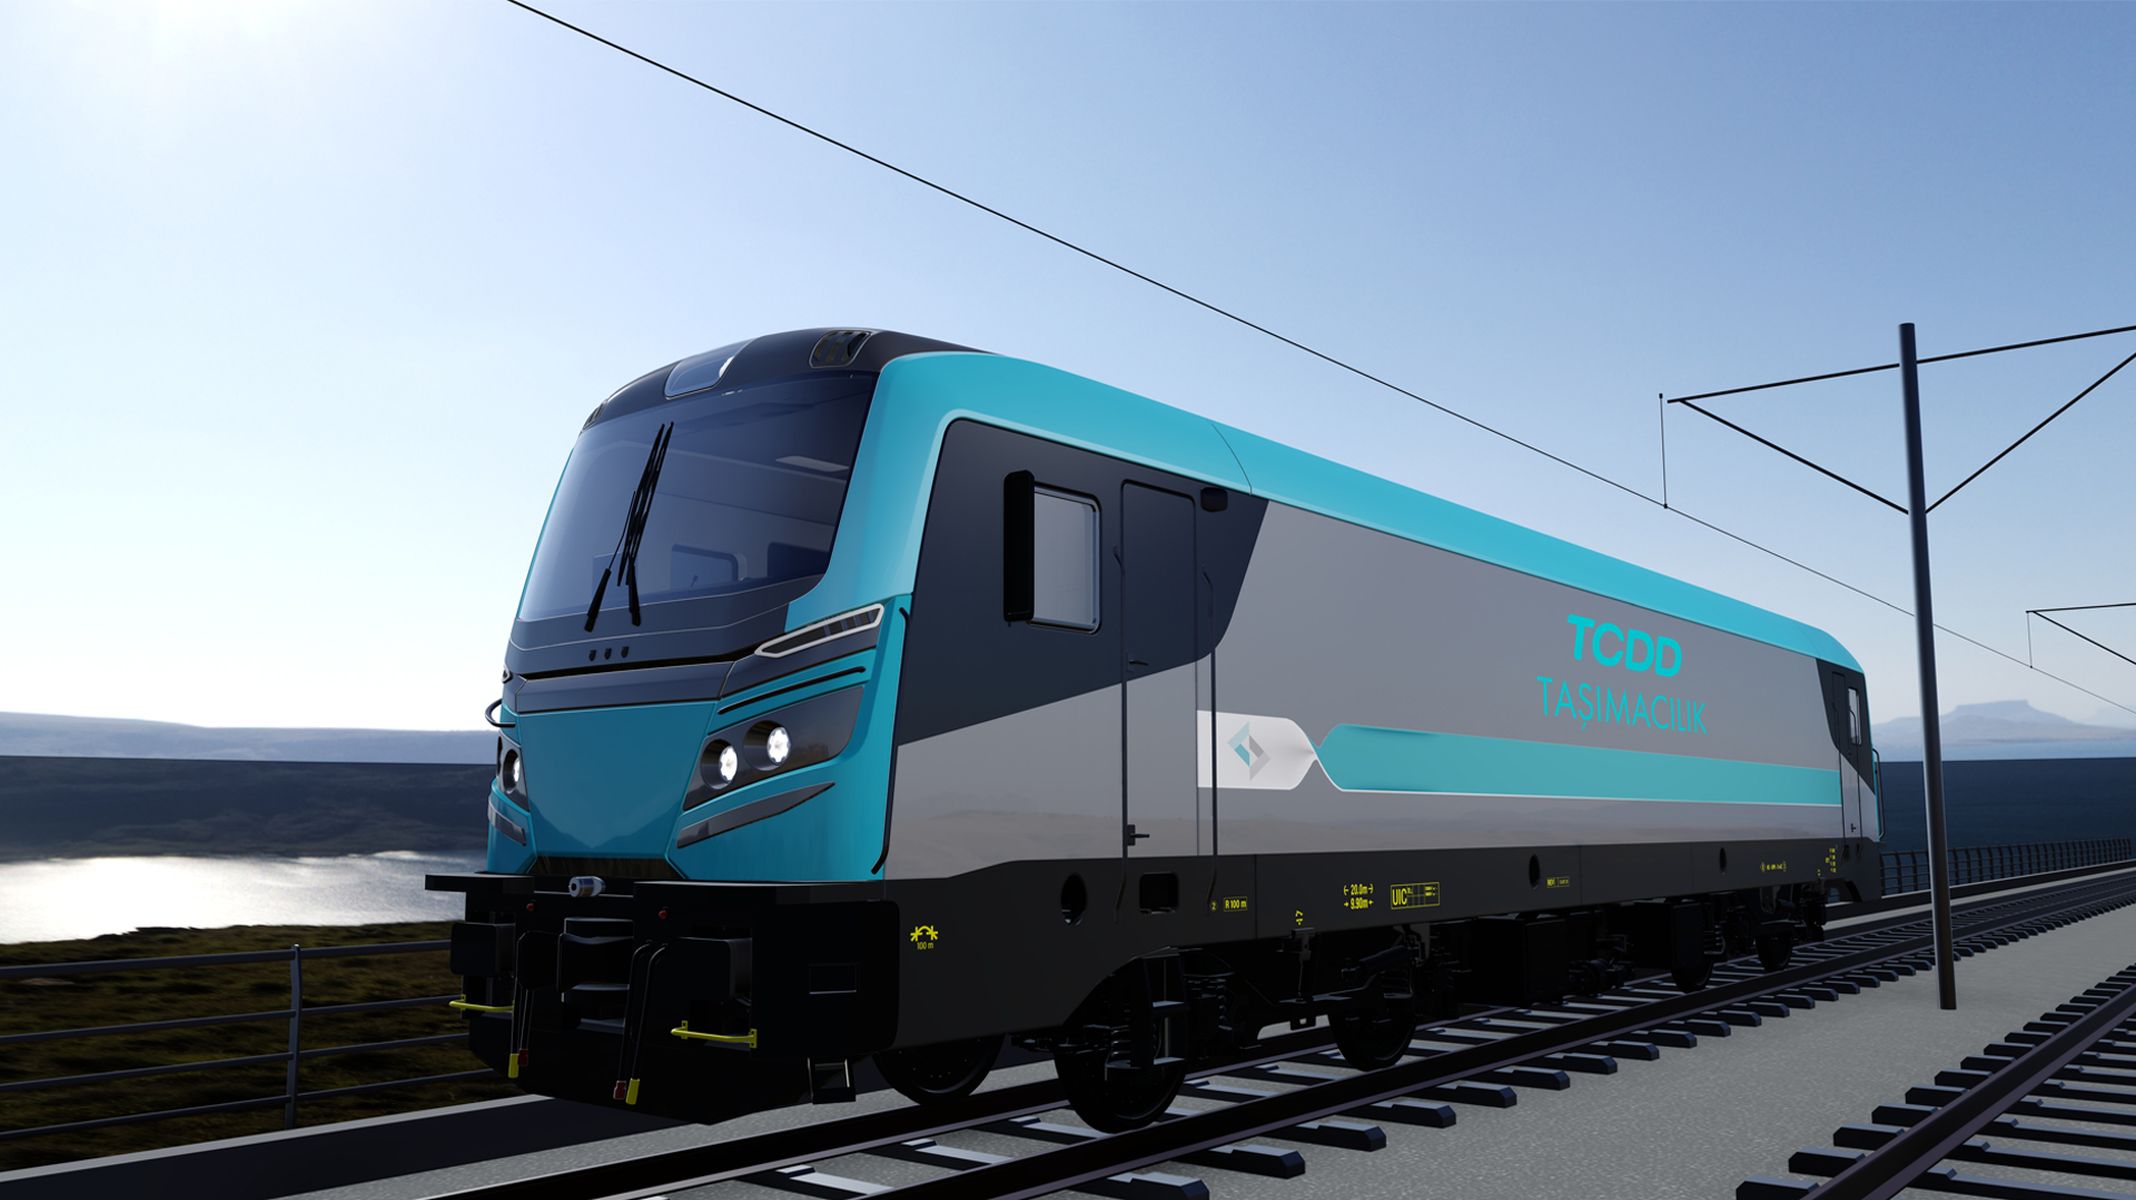 Render of the first mainline electric locomotive of the E5000 series by Türasaş